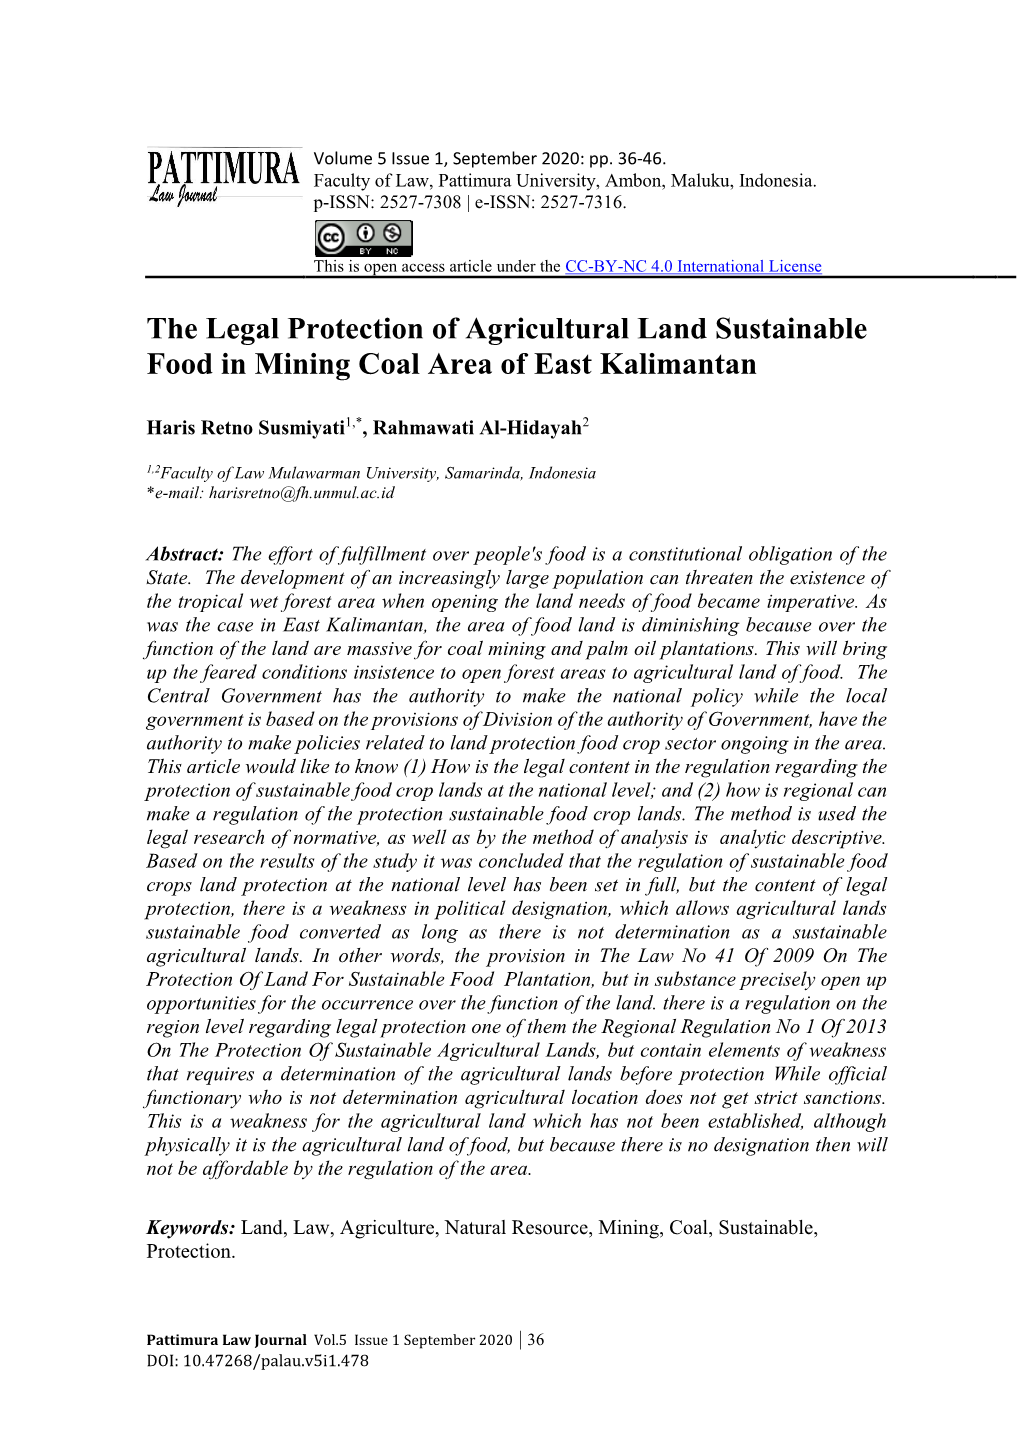 The Legal Protection of Agricultural Land Sustainable Food in Mining Coal Area of East Kalimantan